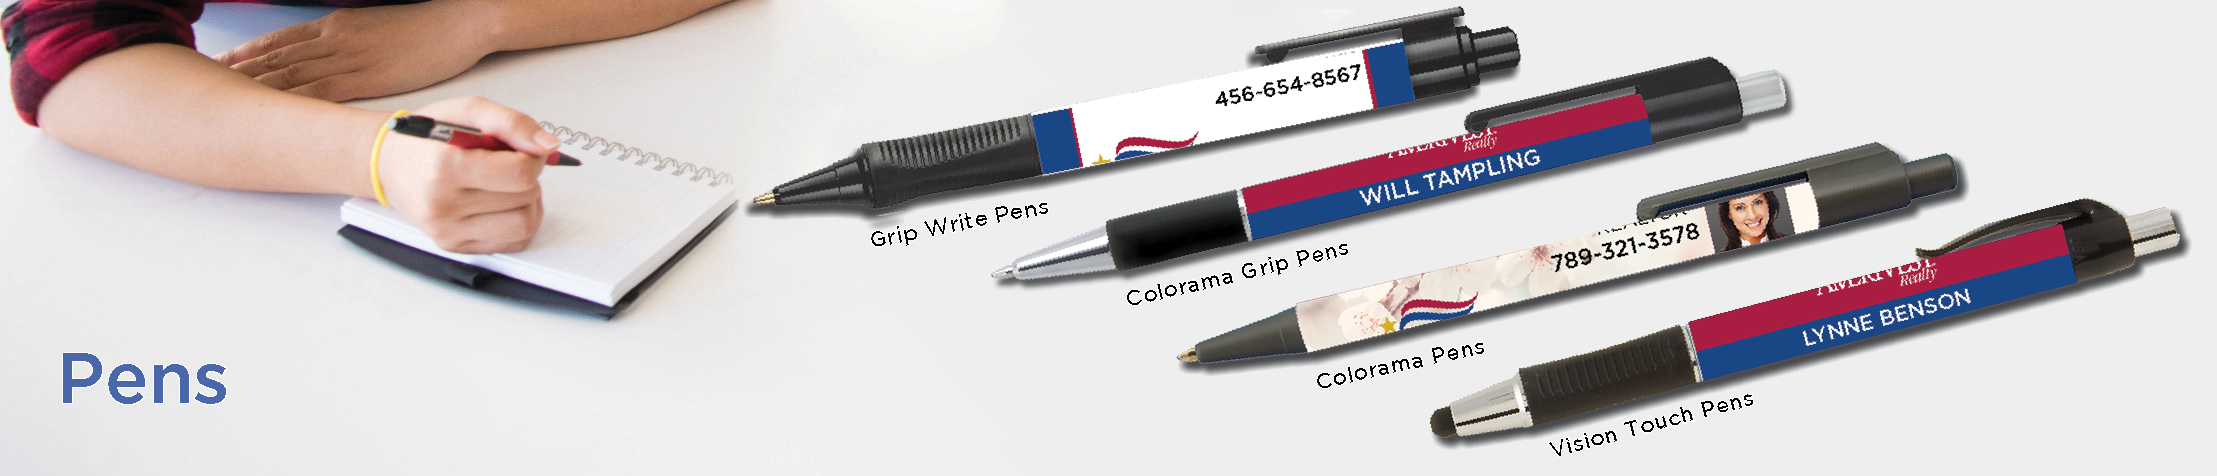 Amerivest Realty Real Estate Personalized Pens - promotional products: Grip Write Pens, Colorama Pens, Vision Touch Pens, and Colorama Grip Pens | BestPrintBuy.com